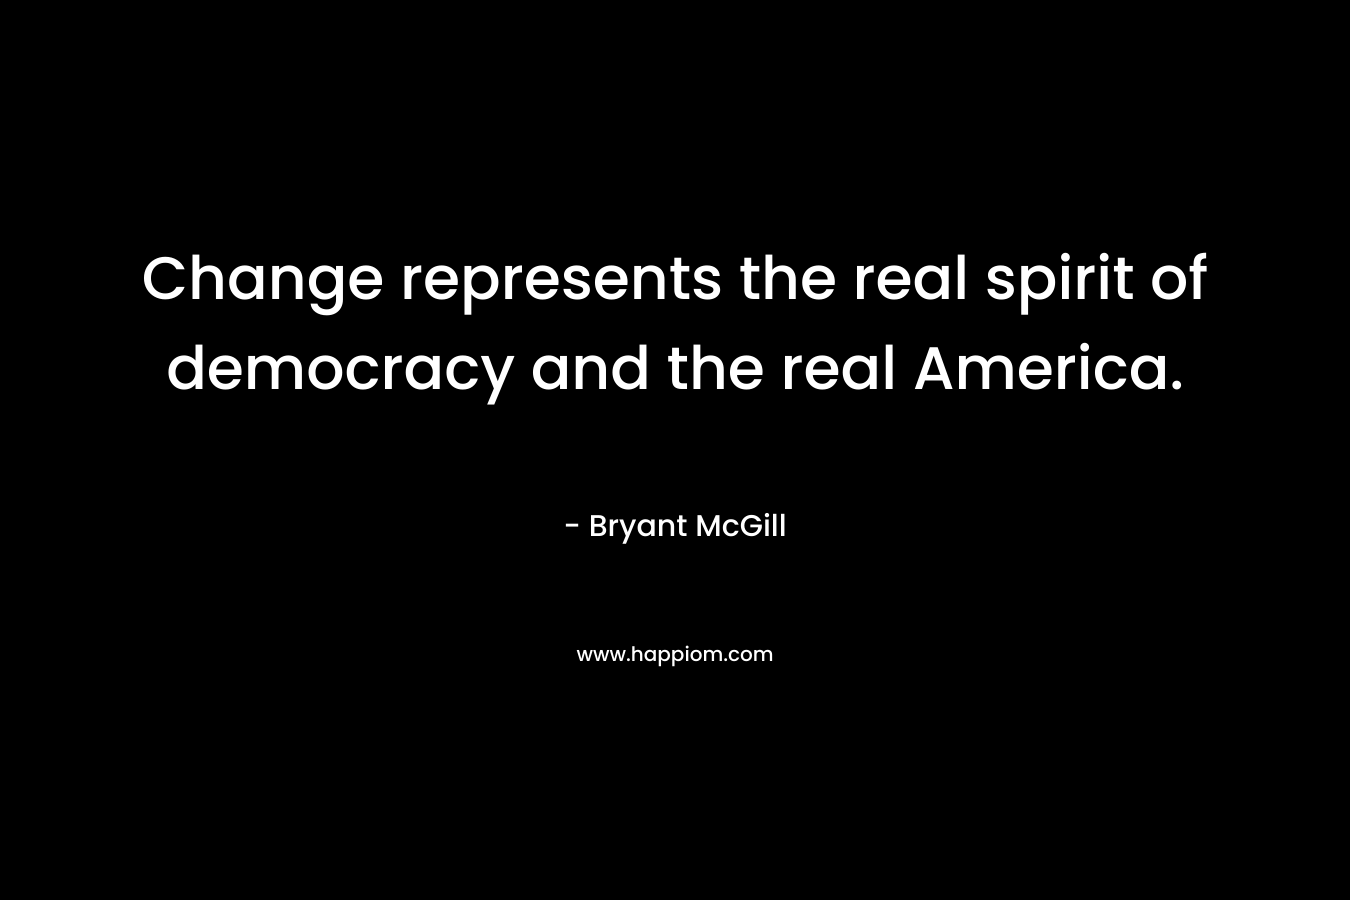 Change represents the real spirit of democracy and the real America.